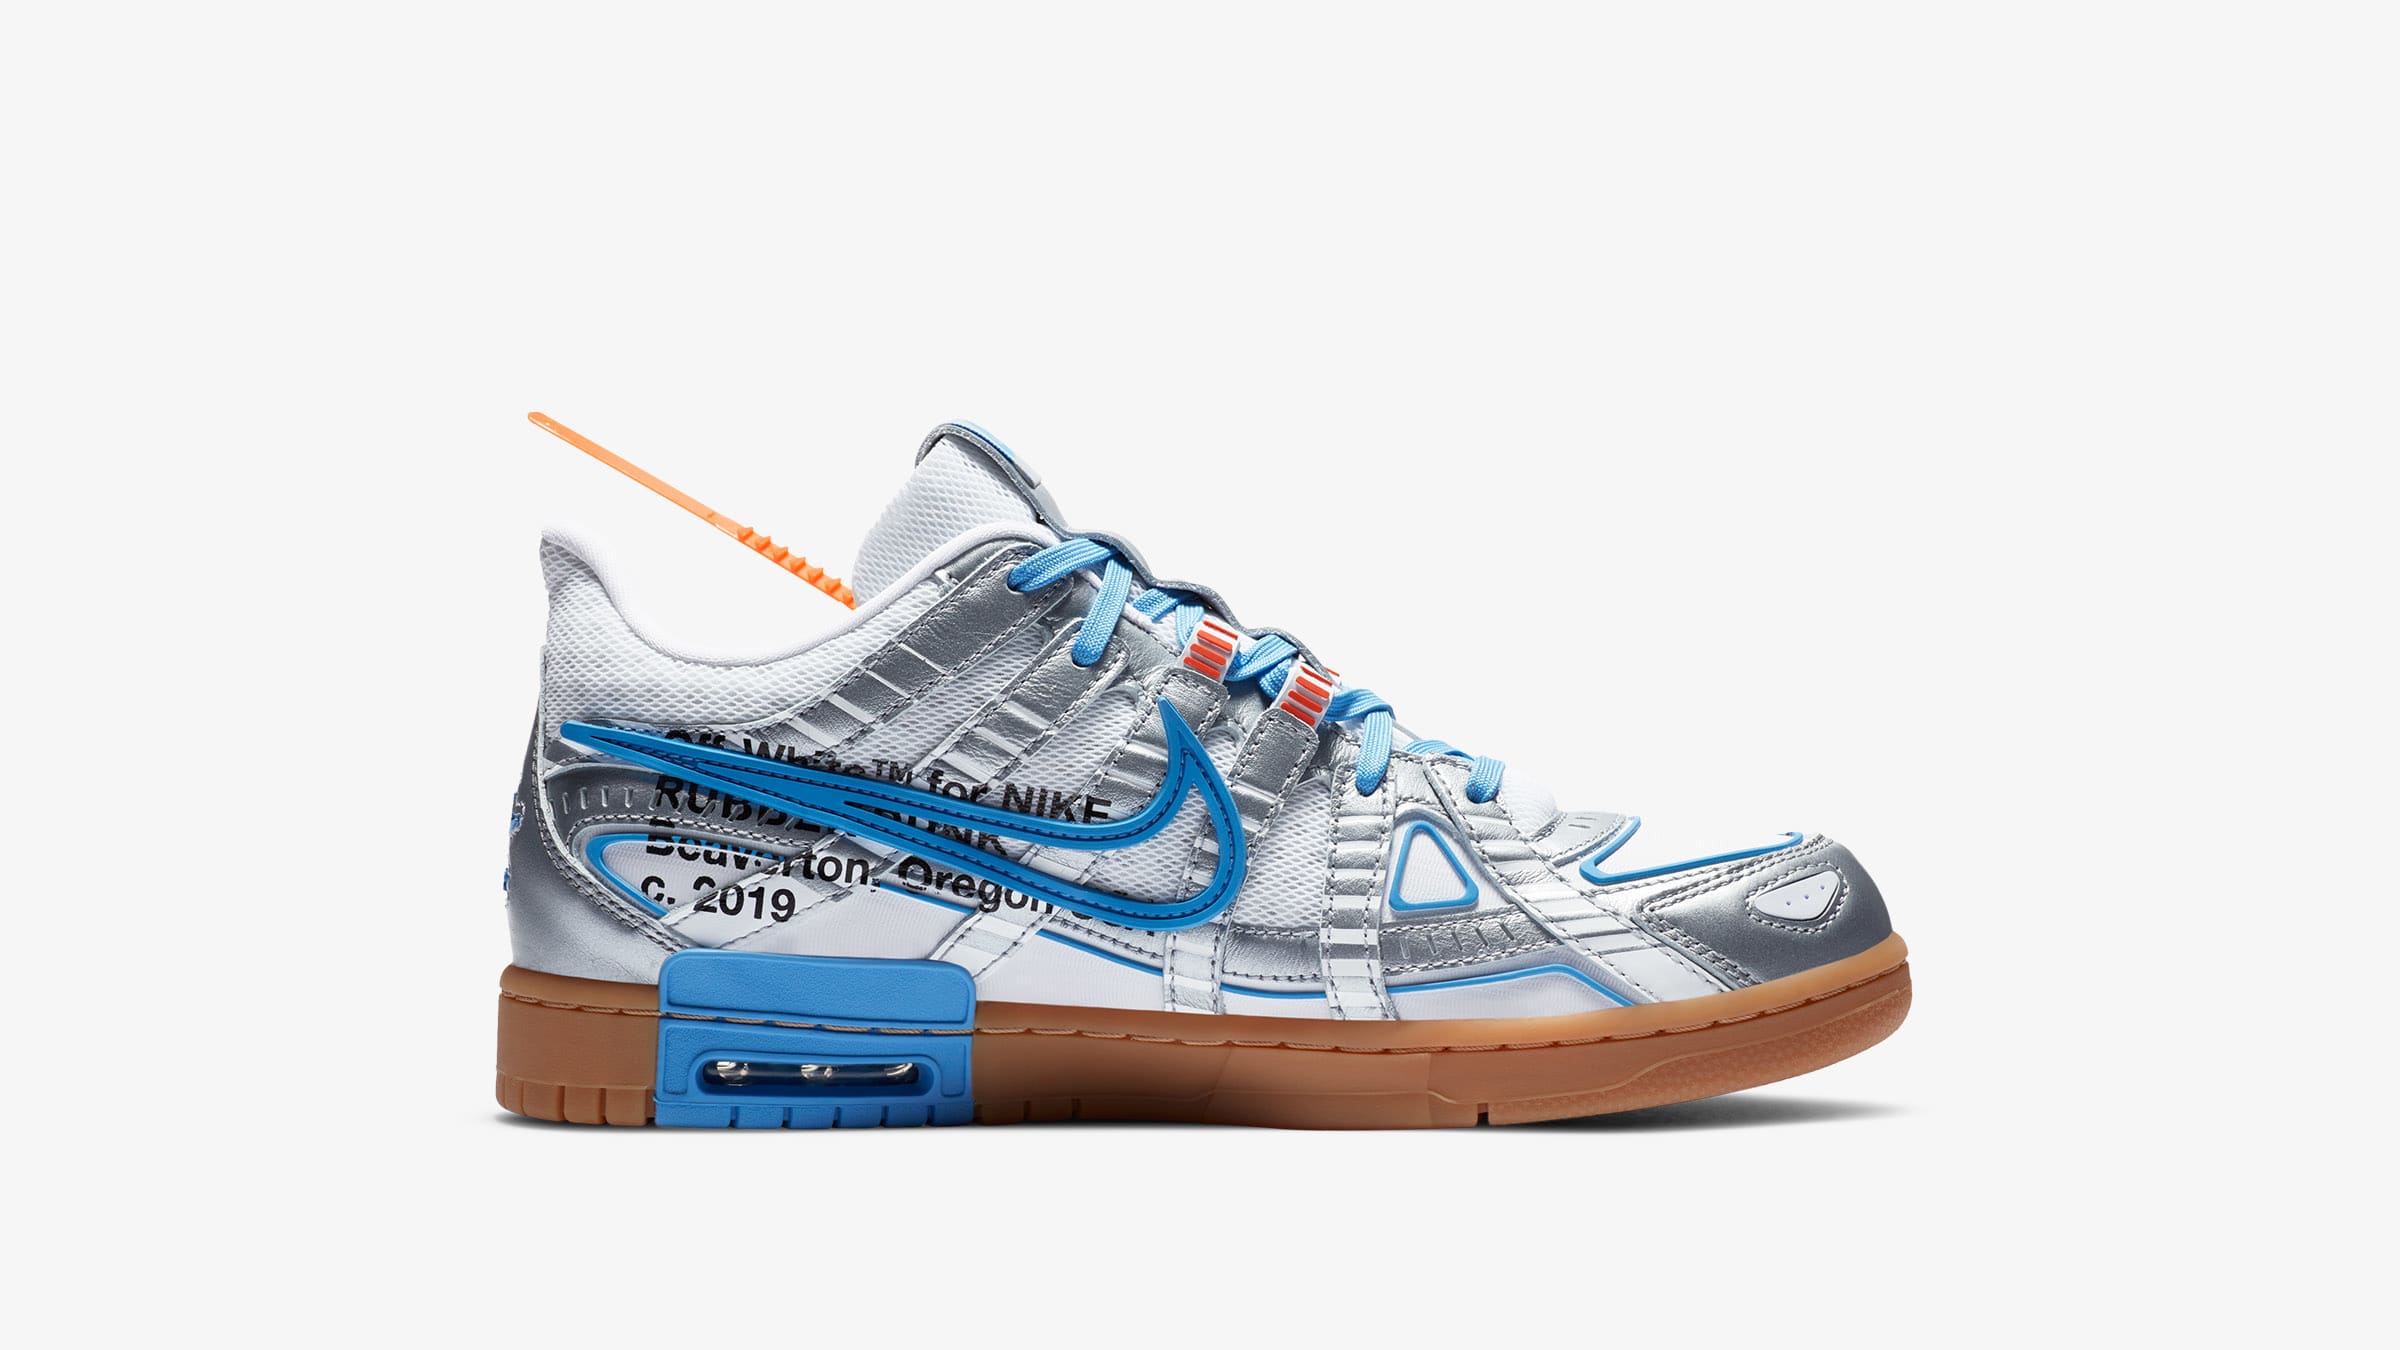 Nike x Off-White Rubber Dunk (White & University Blue) | END. Launches